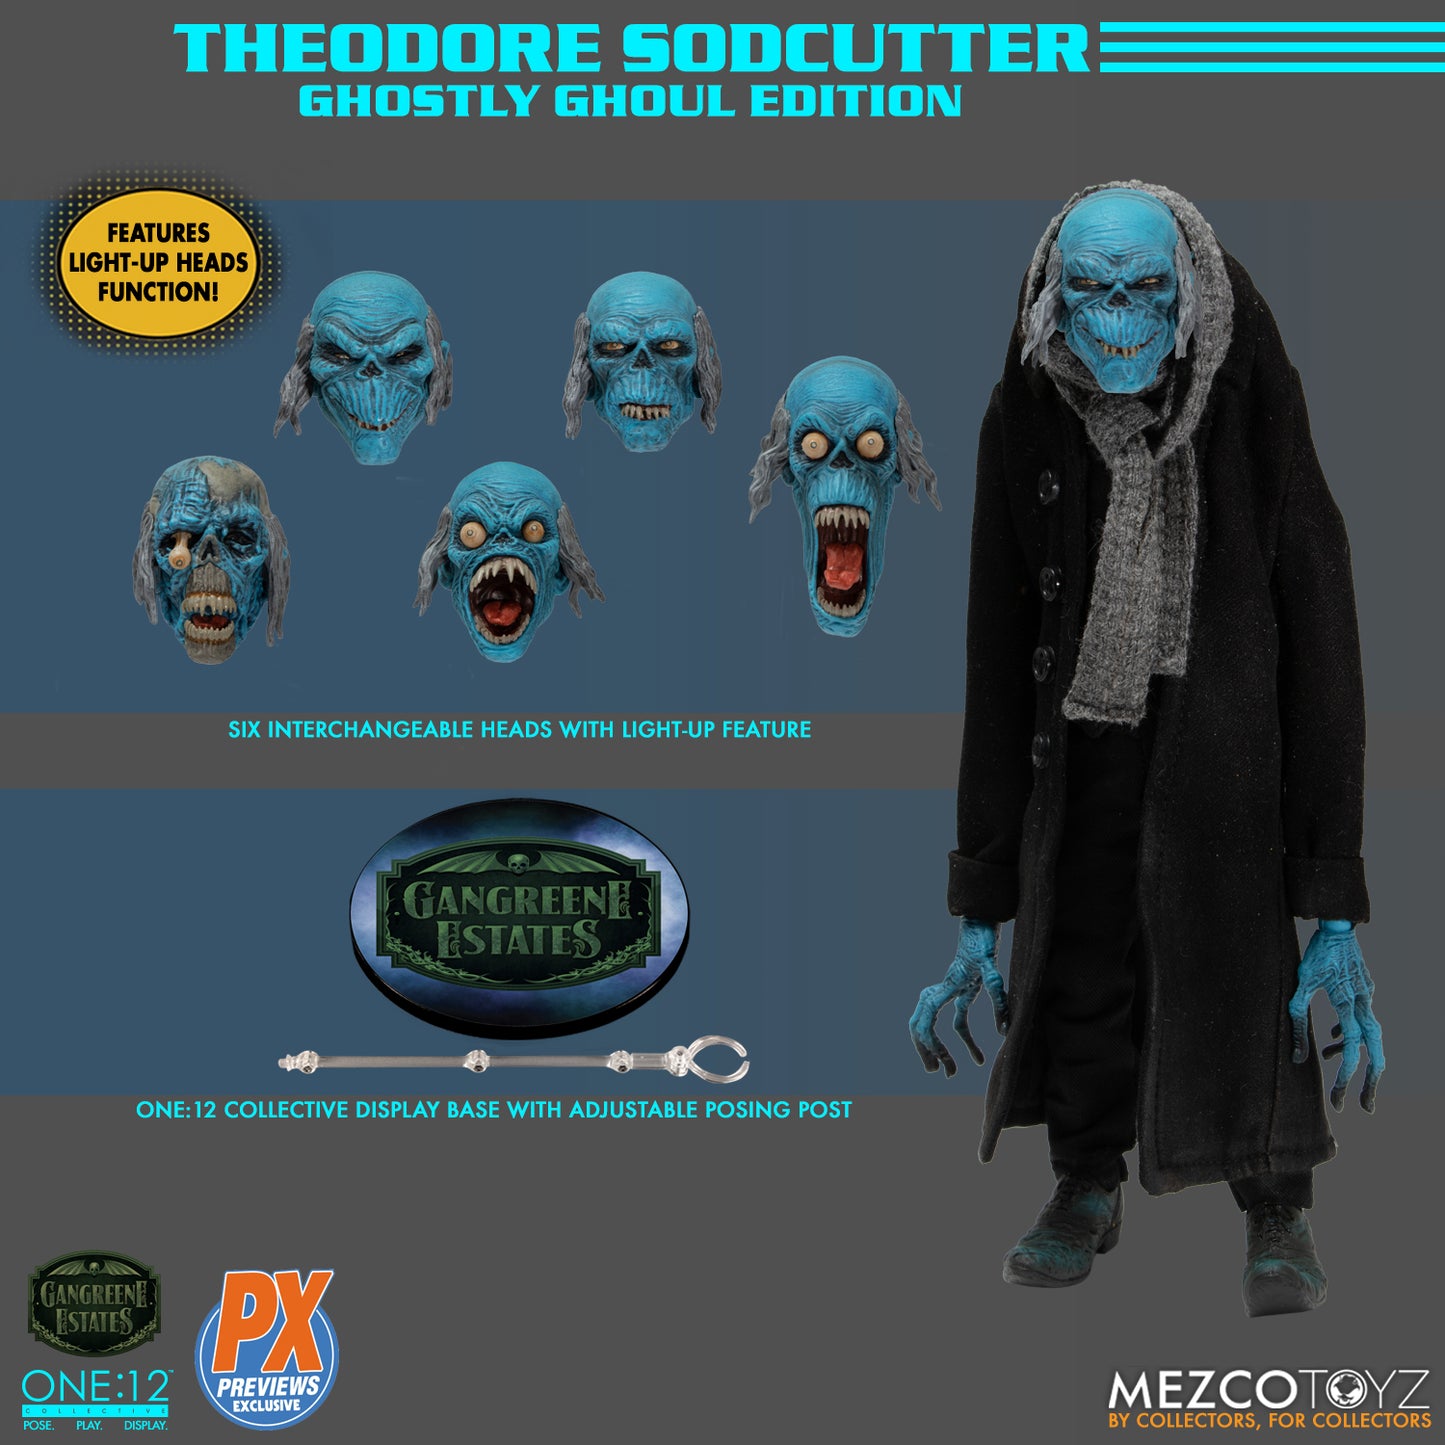 ONE-12 COLLECTIVE THEODORE SODCUTTER GHOSTLY GHOUL